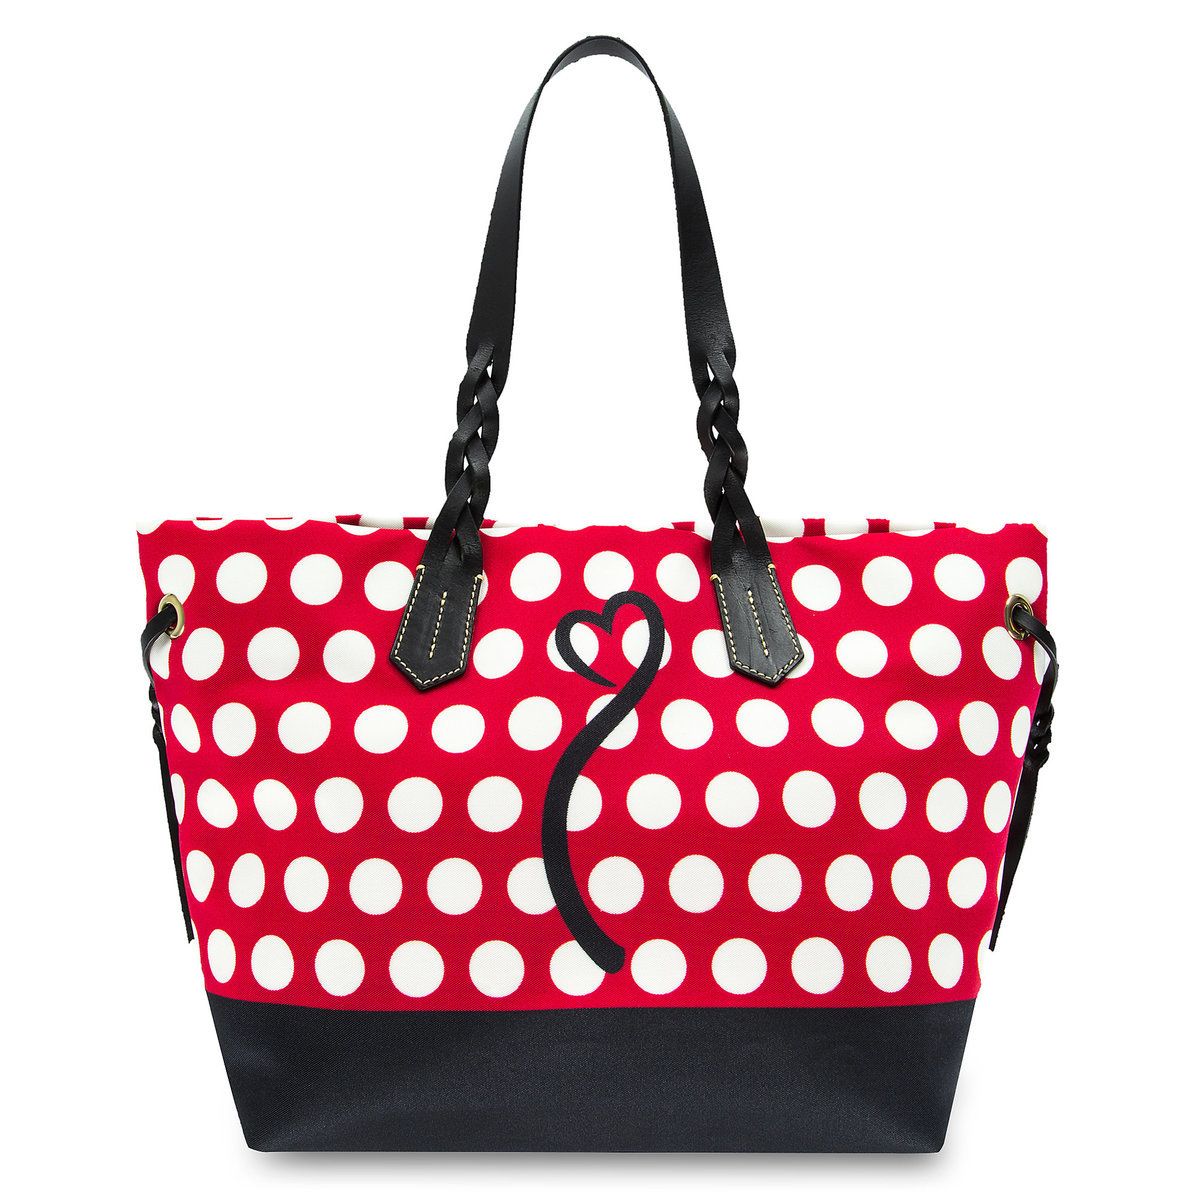 Two New “Rock The Dots” Dooney & Bourke Bags Out Now – DisKingdom.com